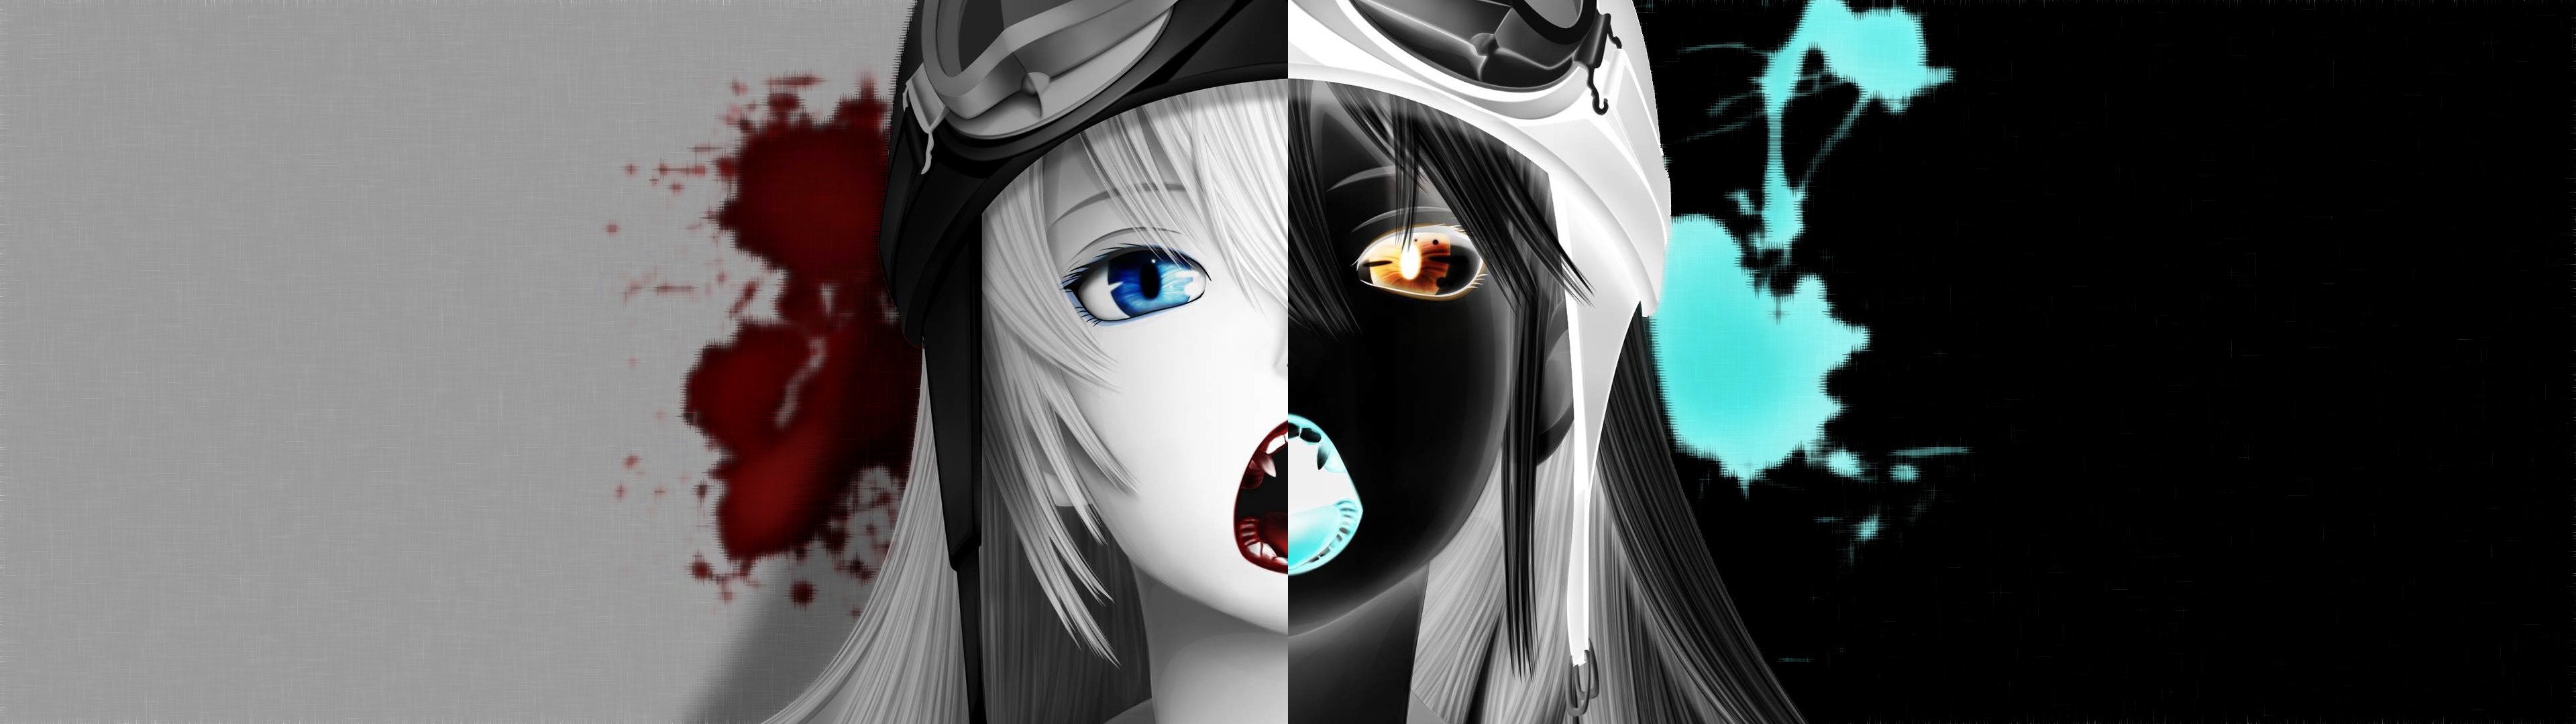 Anime Inverted Anime Girls Cyan Frontal View 3840x1080